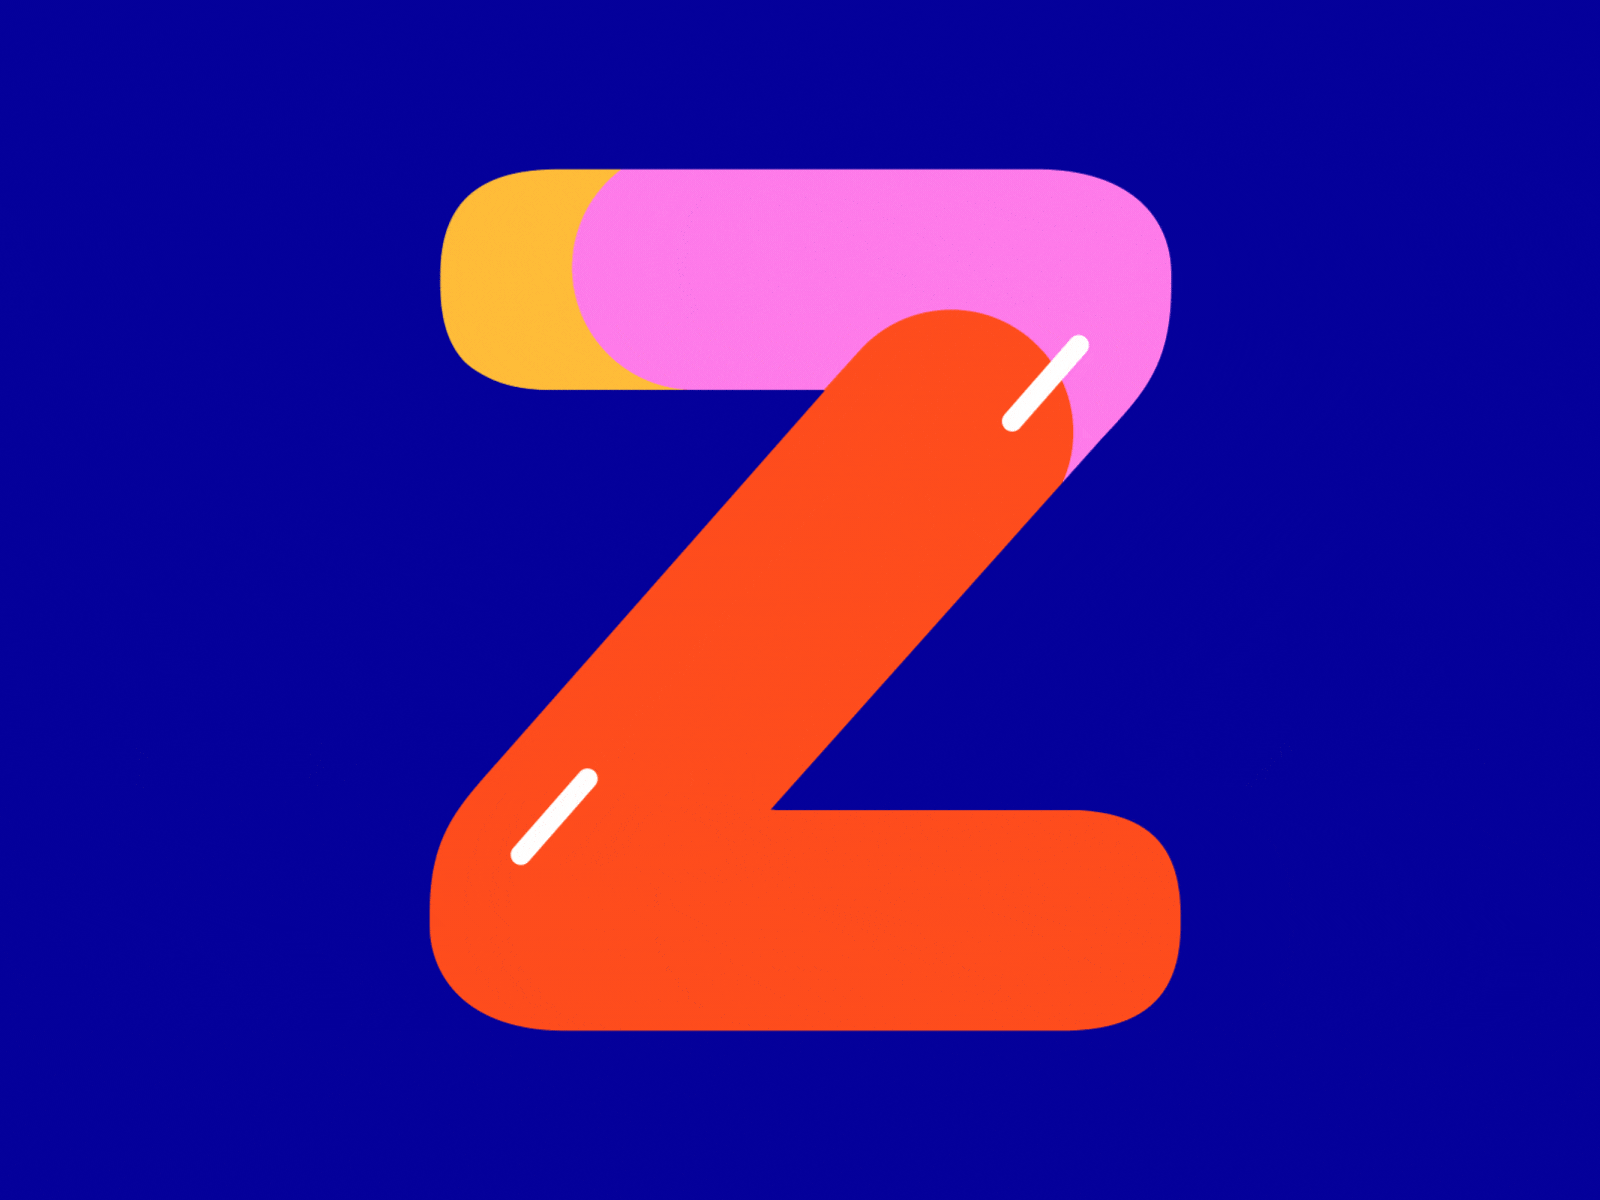 36 Days of Type / Z 36 days of type 36daysoftype 36daysoftype08 36dot ae after effects animated animated type animation animography colors design kinetic kinetic type motion motion design motion graphic motion graphics type typography